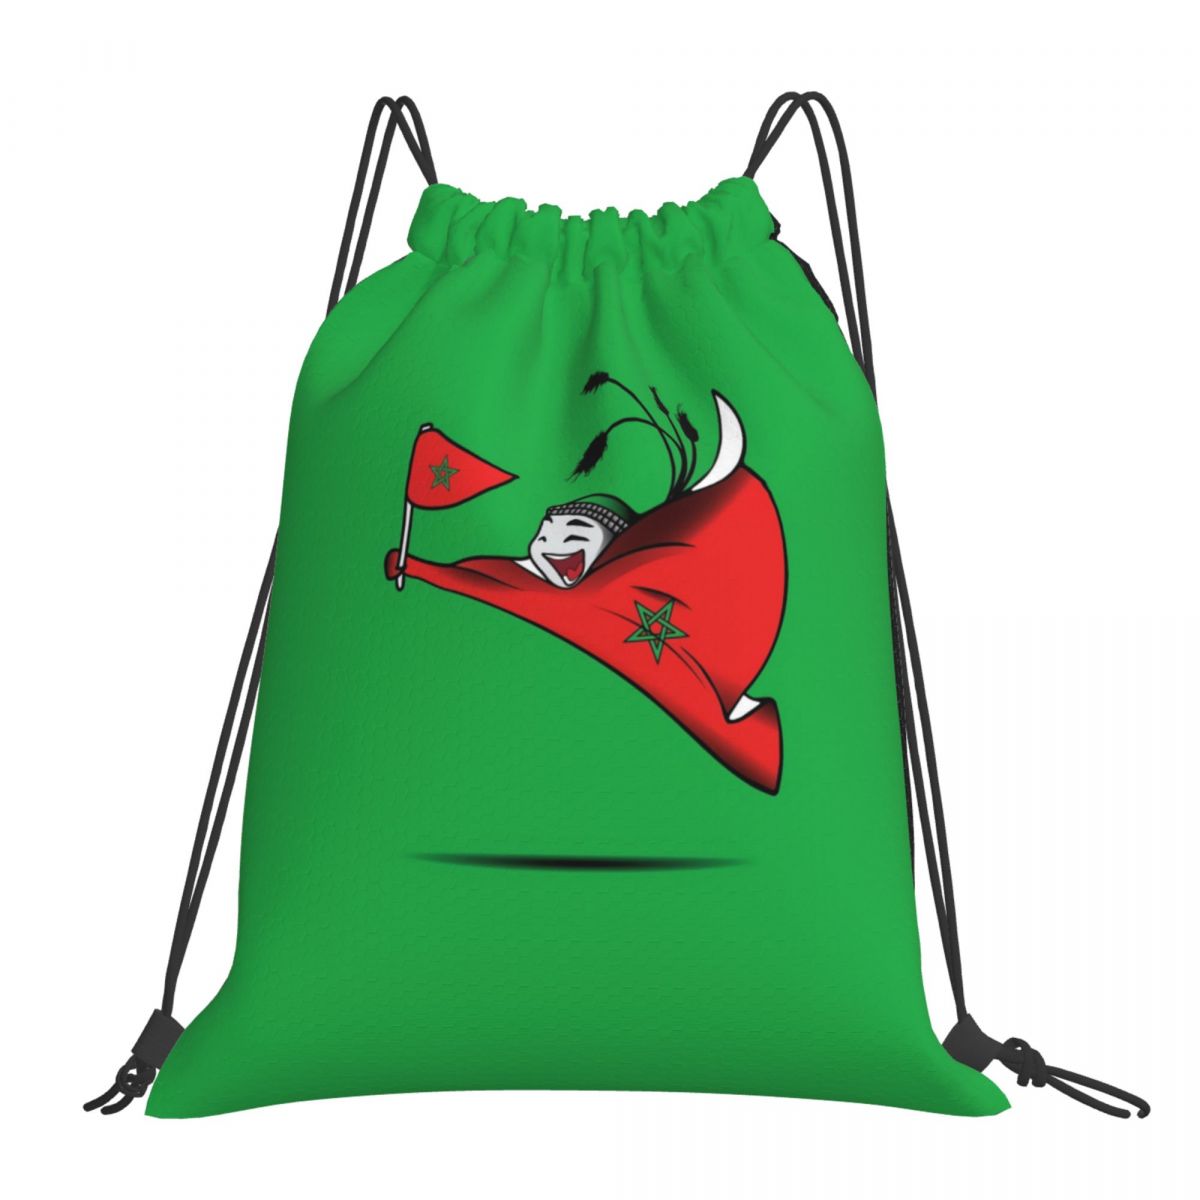 Morocco World Cup 2022 Mascot Drawstring Bags for School Gym